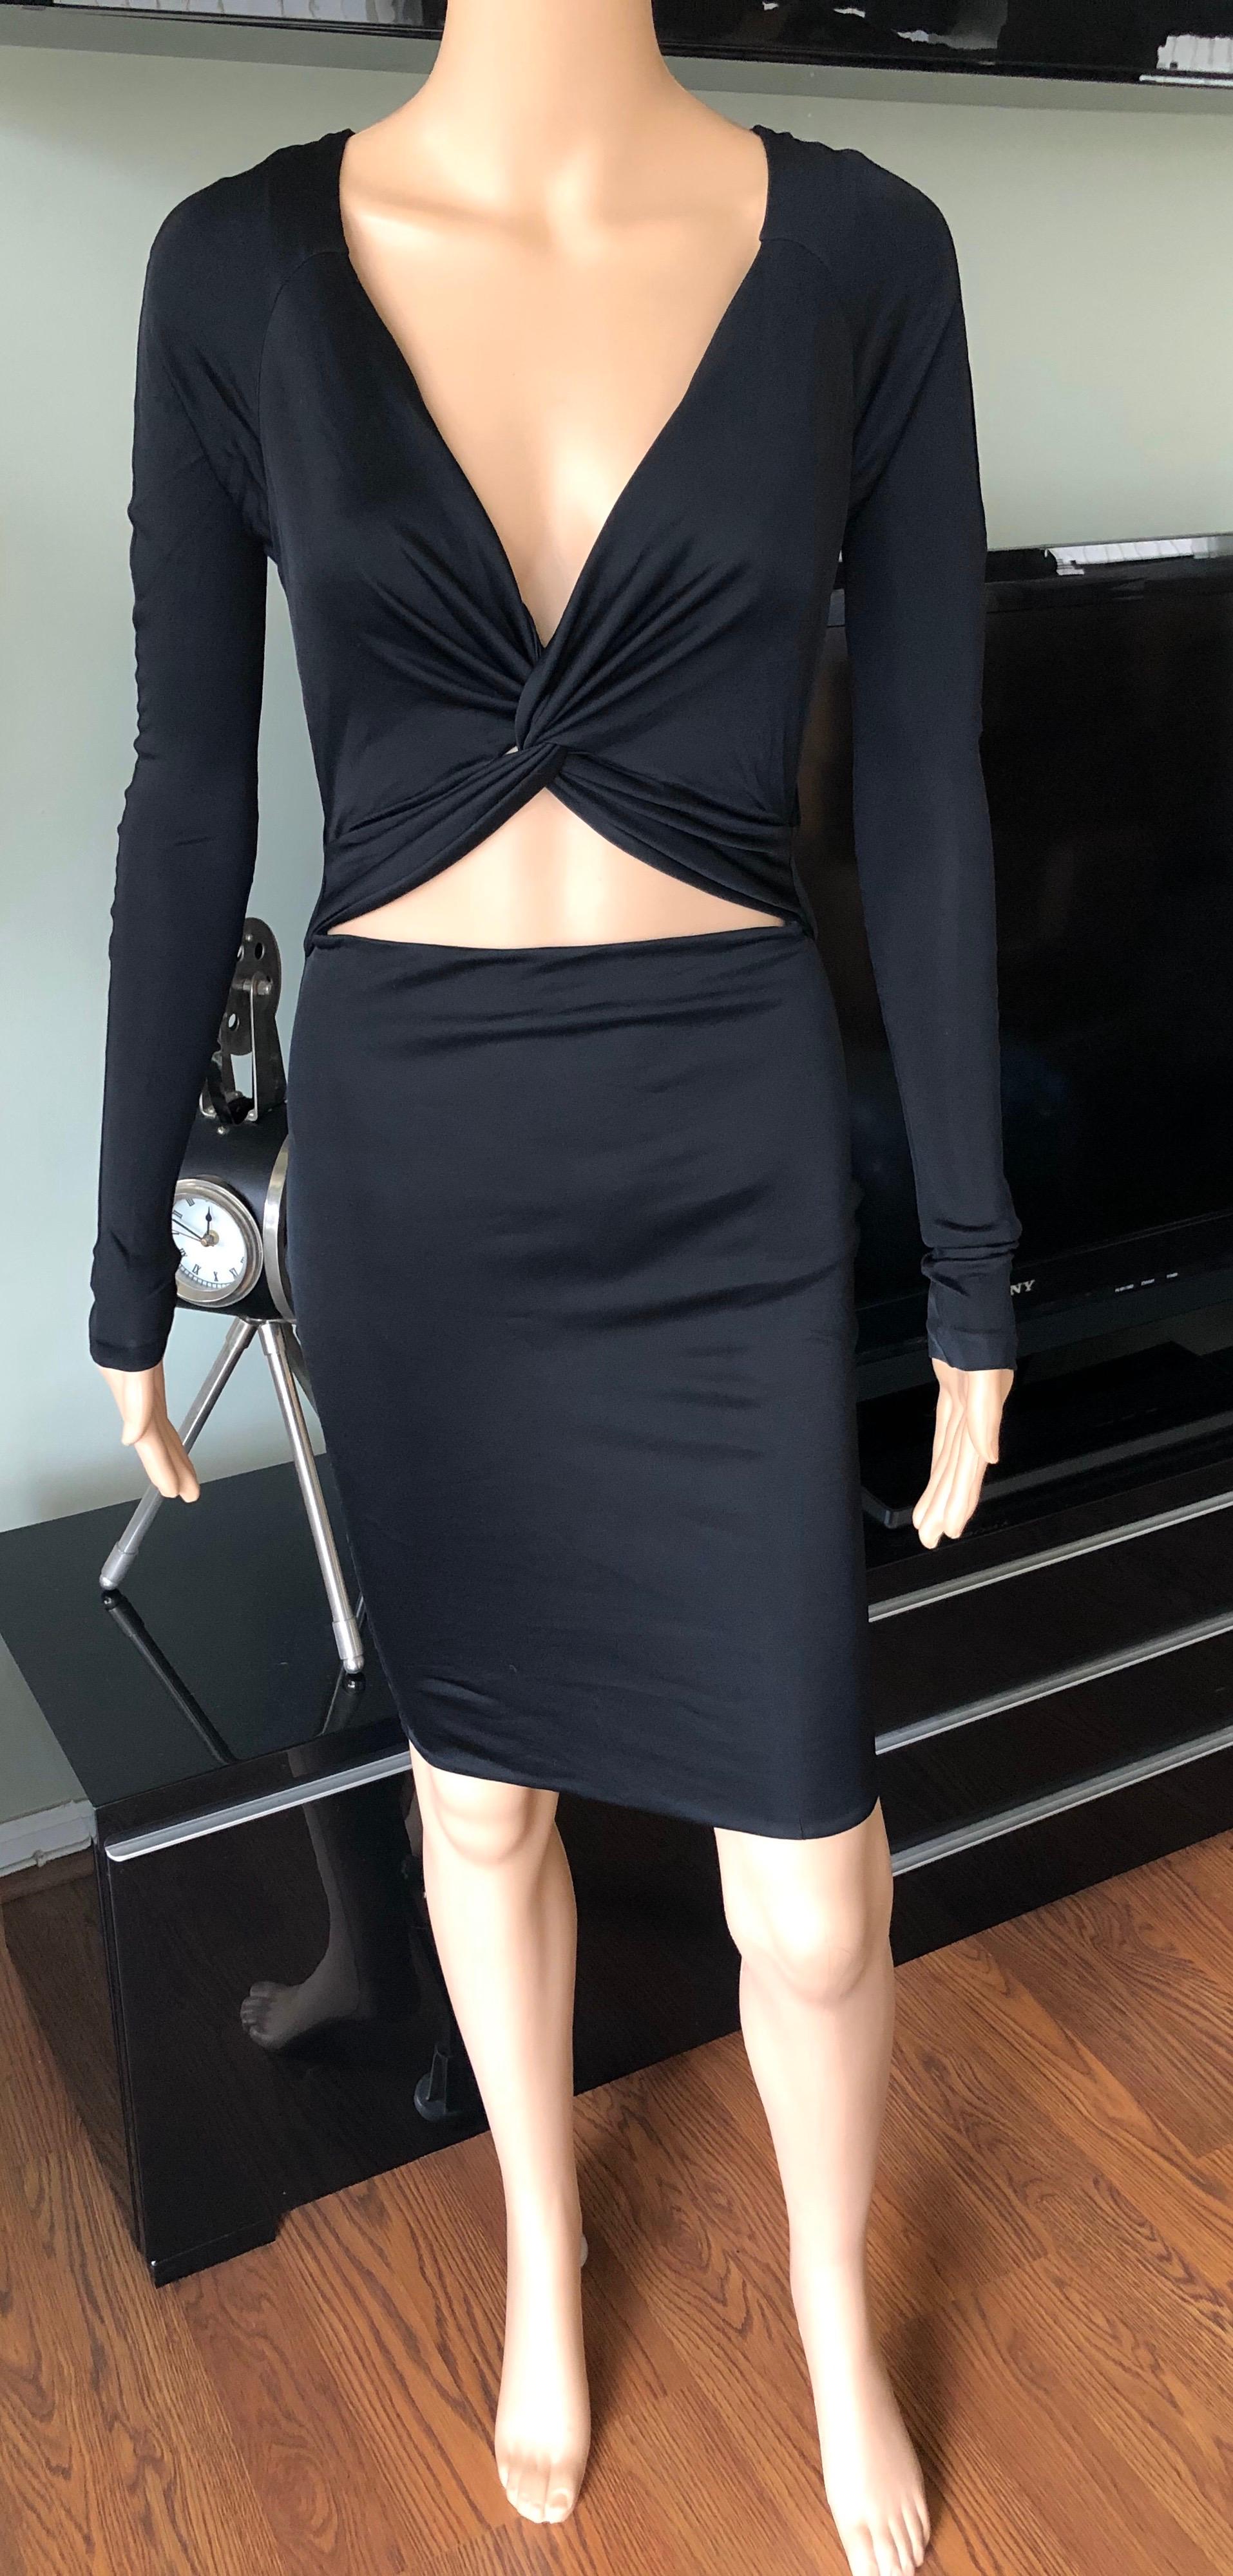 Gucci S/S 2005 Tom Ford Plunging Cutout Backless Bodycon Black Dress For Sale 6